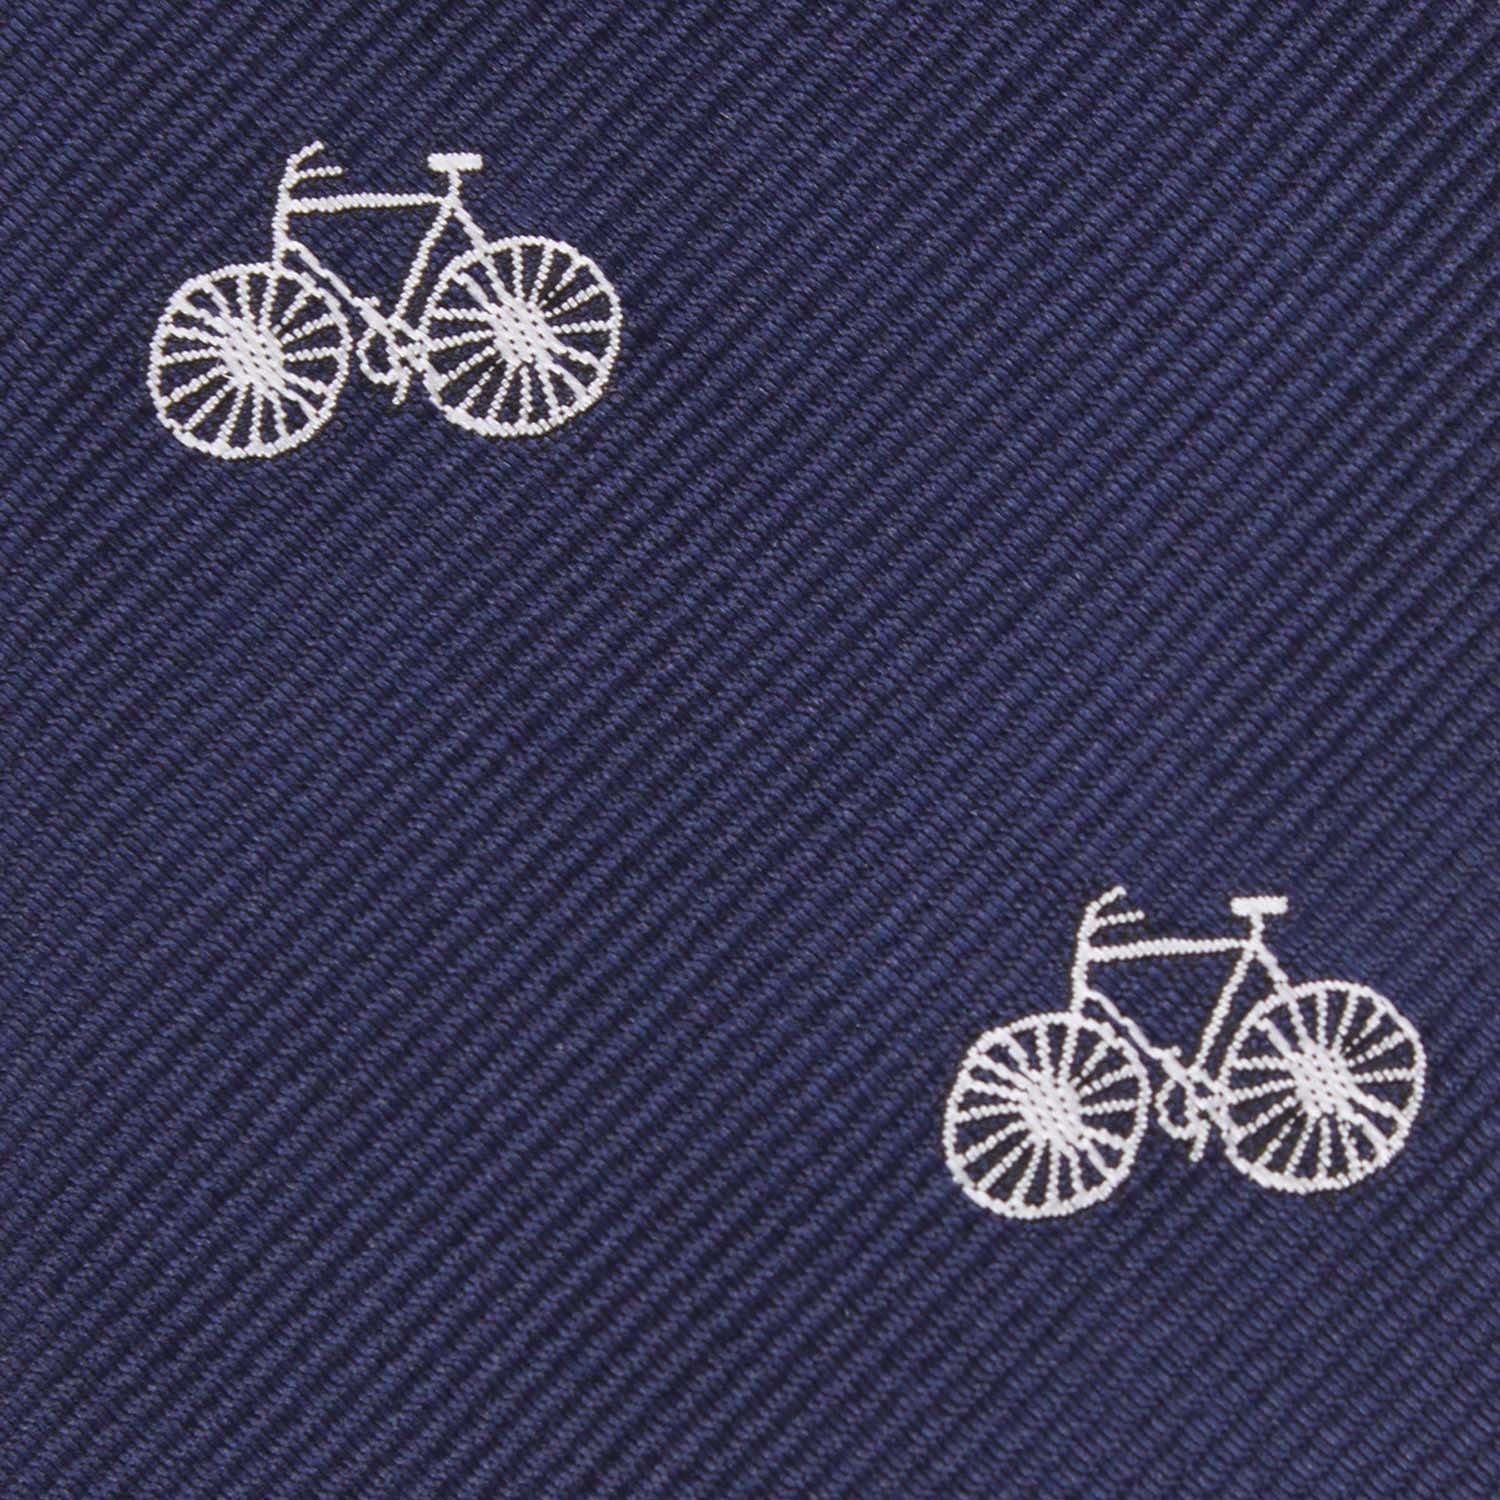 Navy Blue French Bicycle Fabric Skinny Tie M096